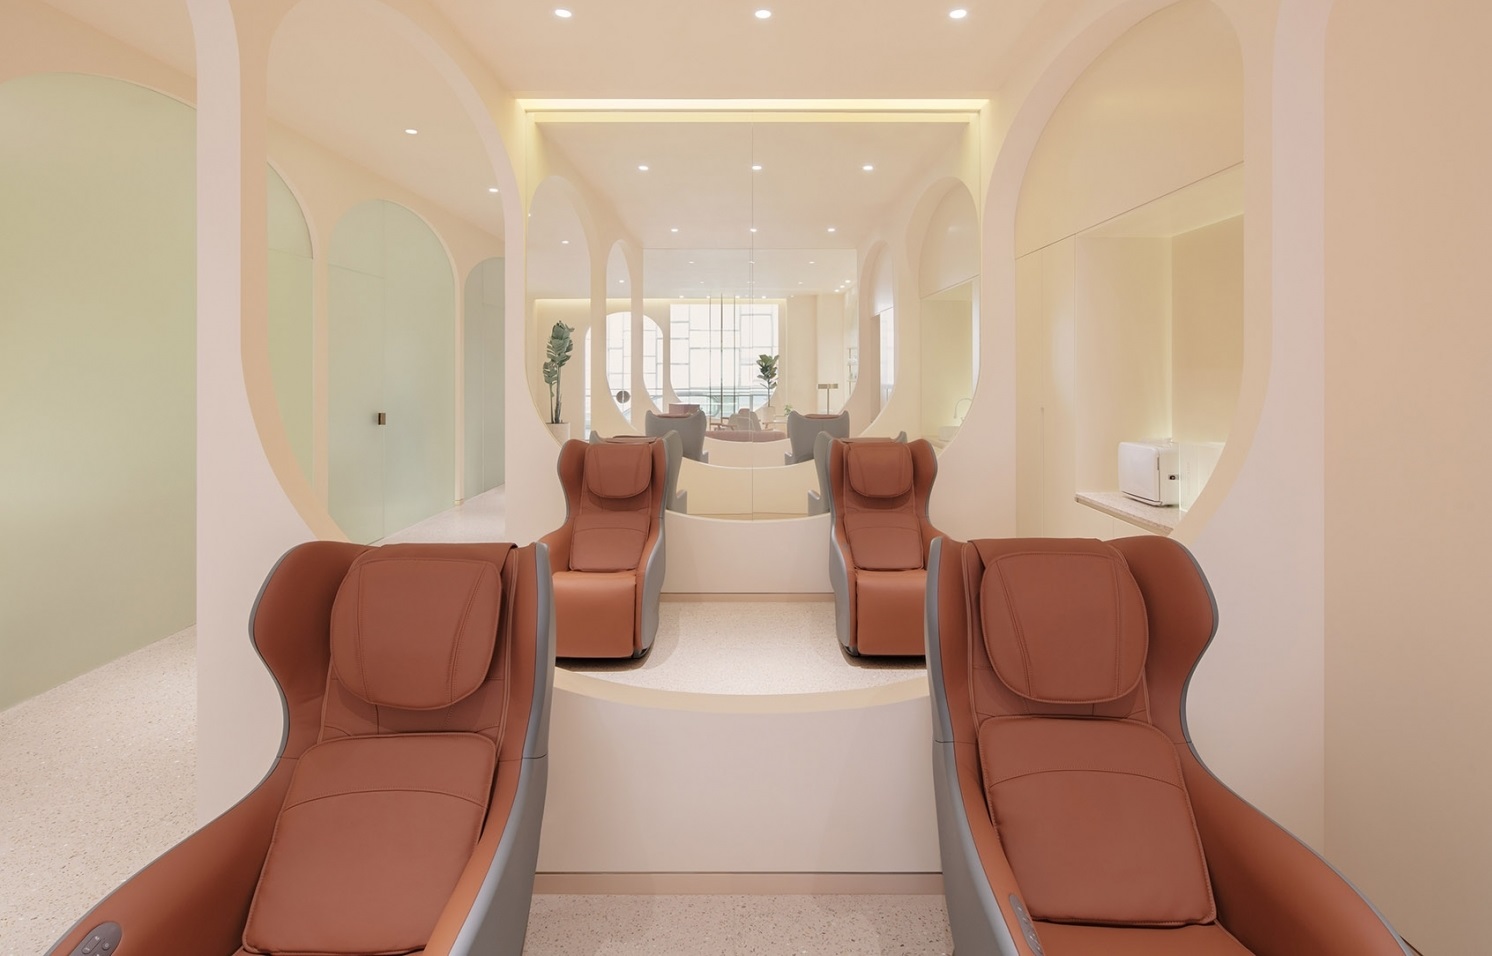 The beauty salon design of Narcissus Beauty Chain Store